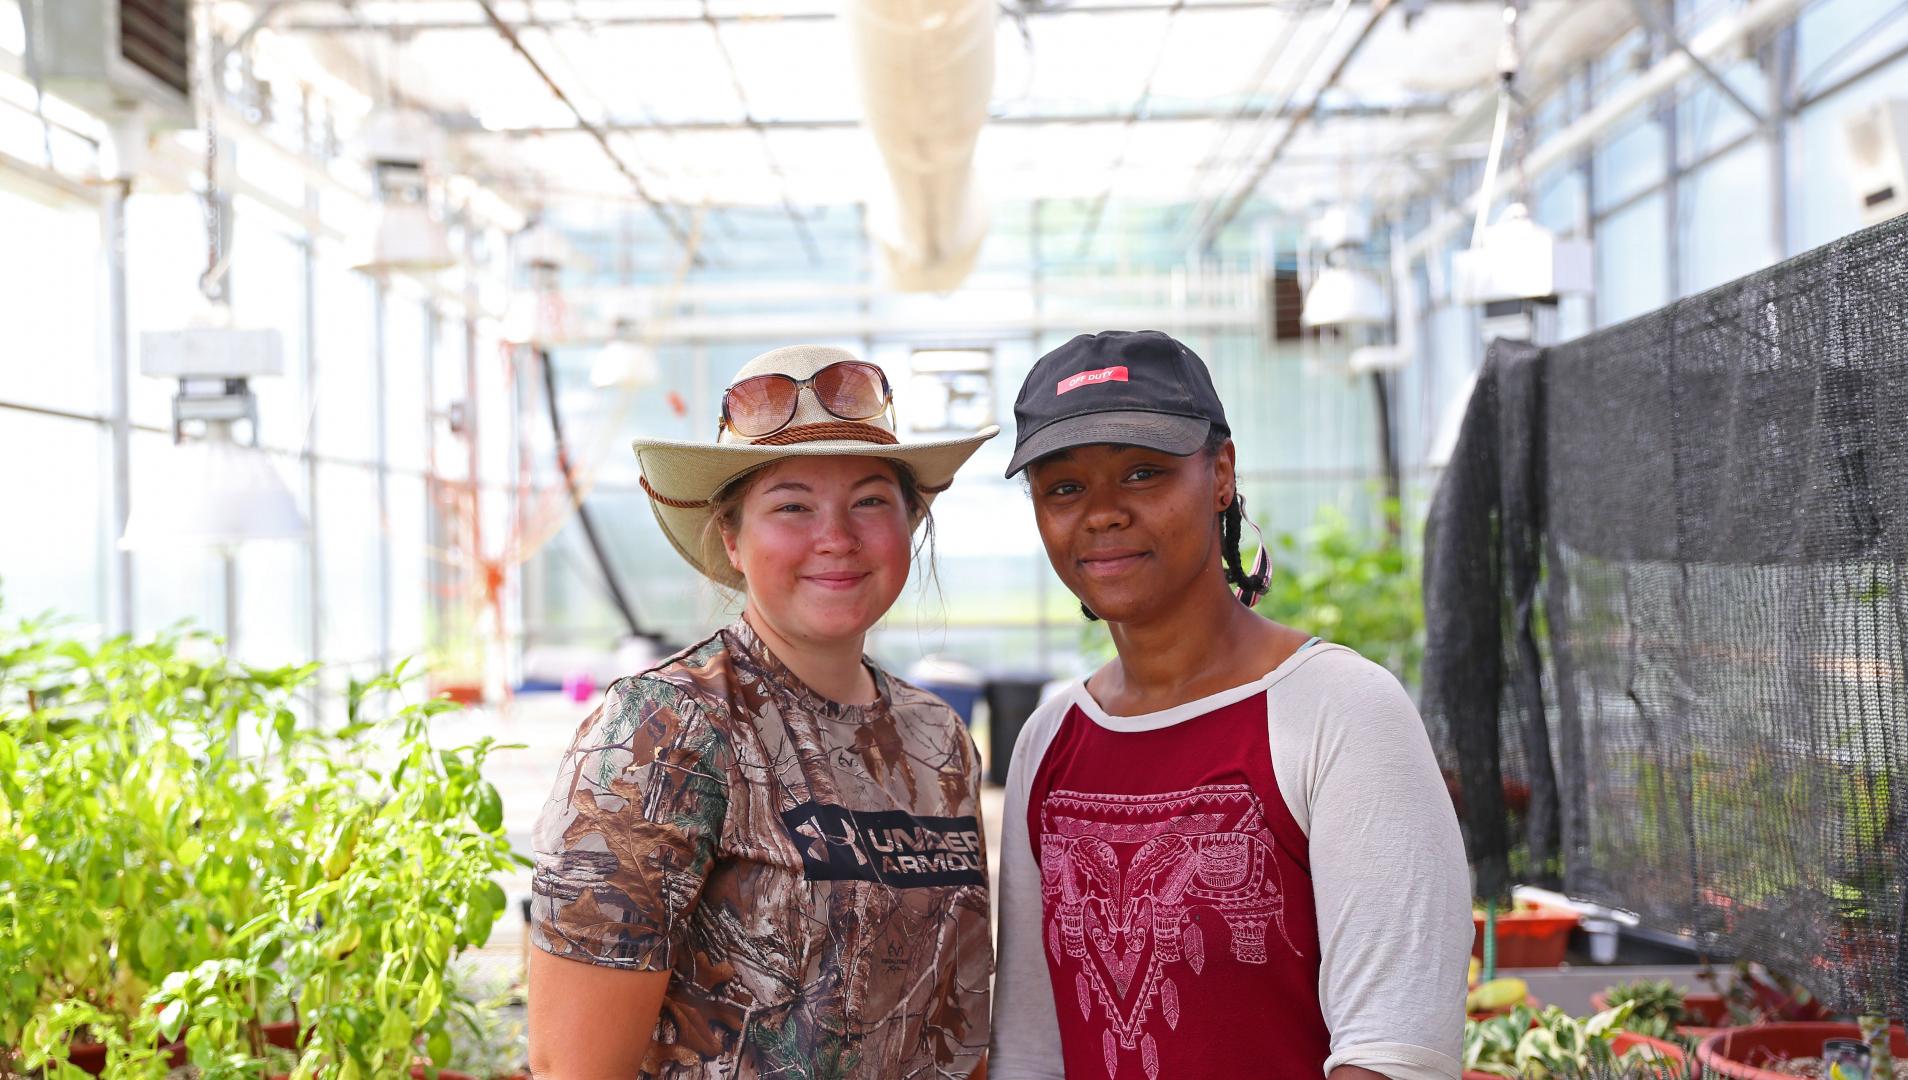 Truthwaite and Salemon in an Assiniboine greenhouse during their summer employment between years of study